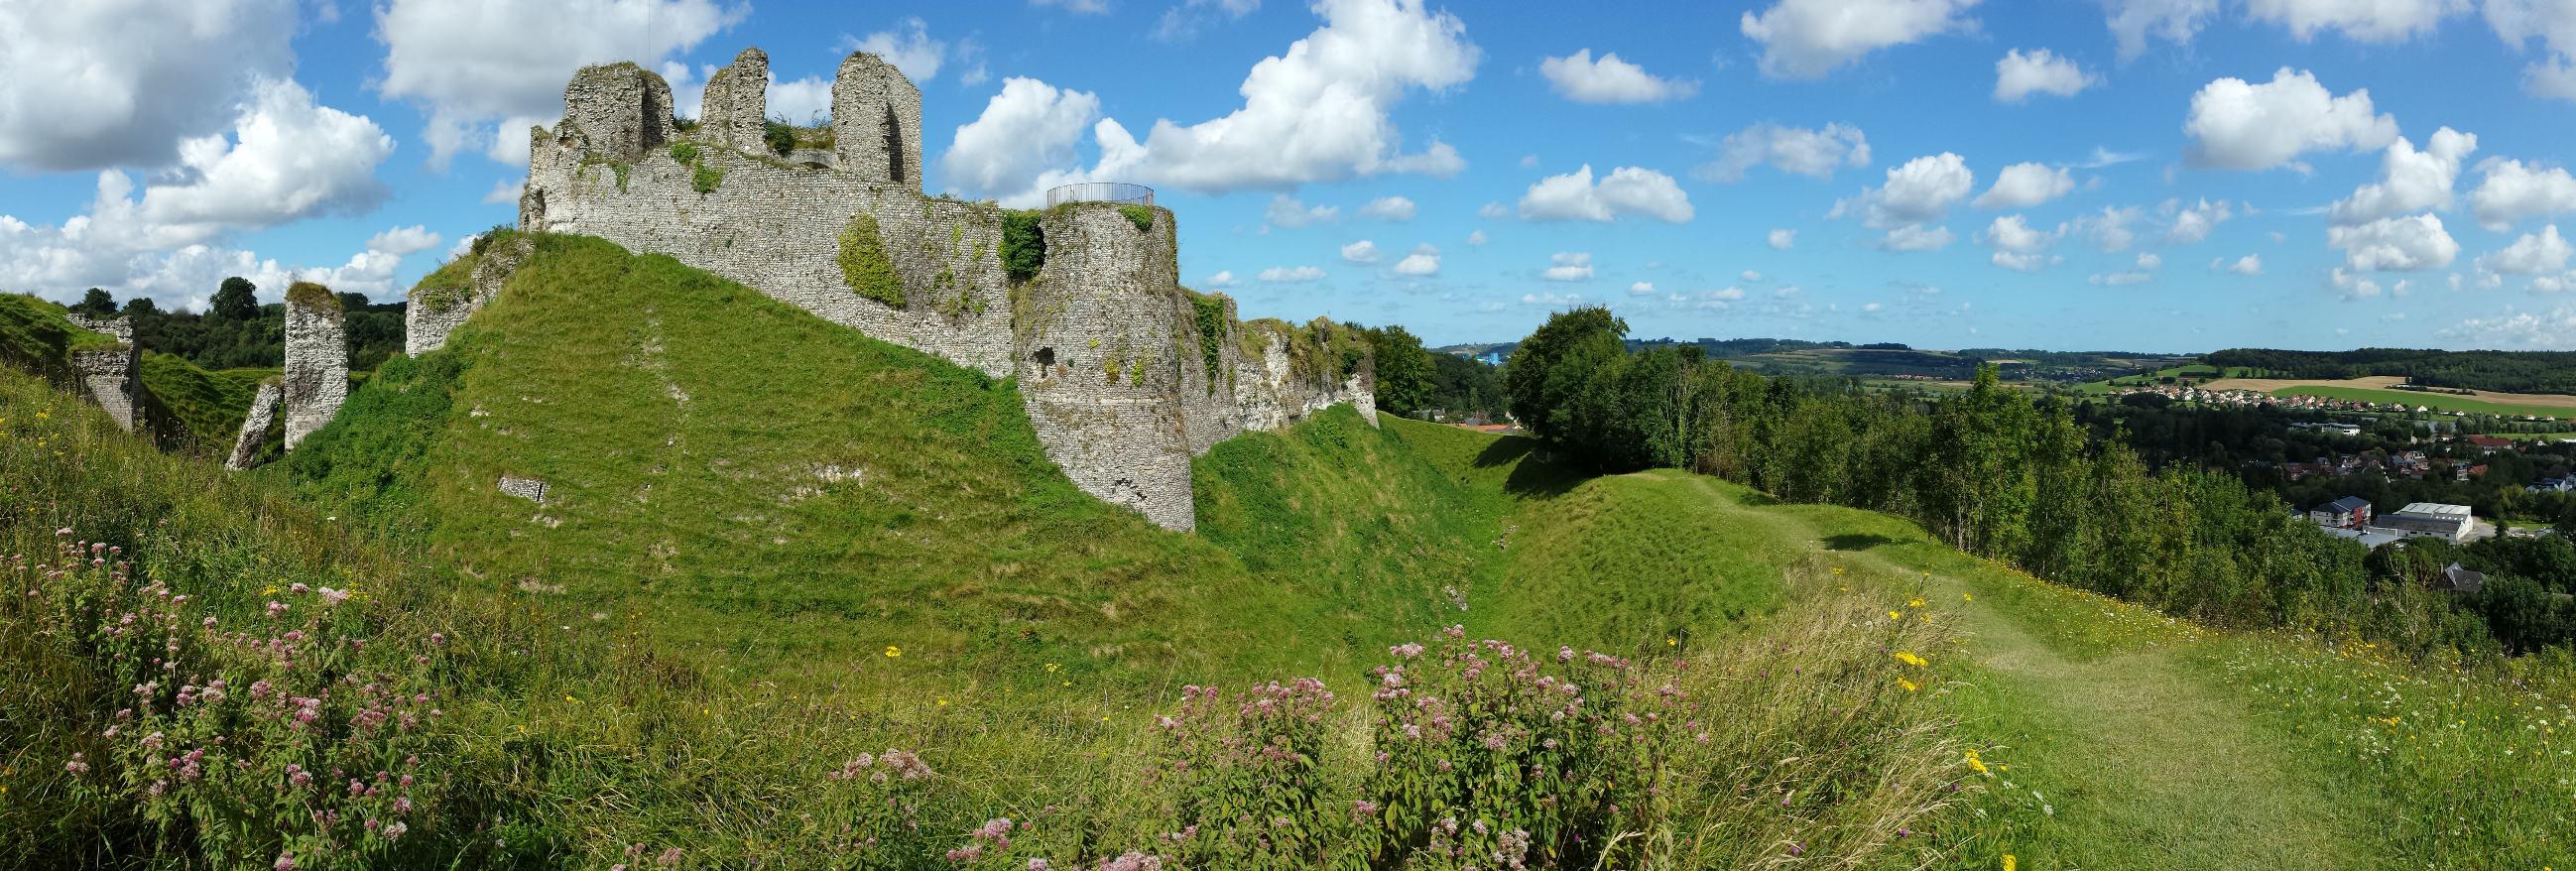 Panoramic view of an old stone castle overseeing a green landscape, under a cloudy blue sky.